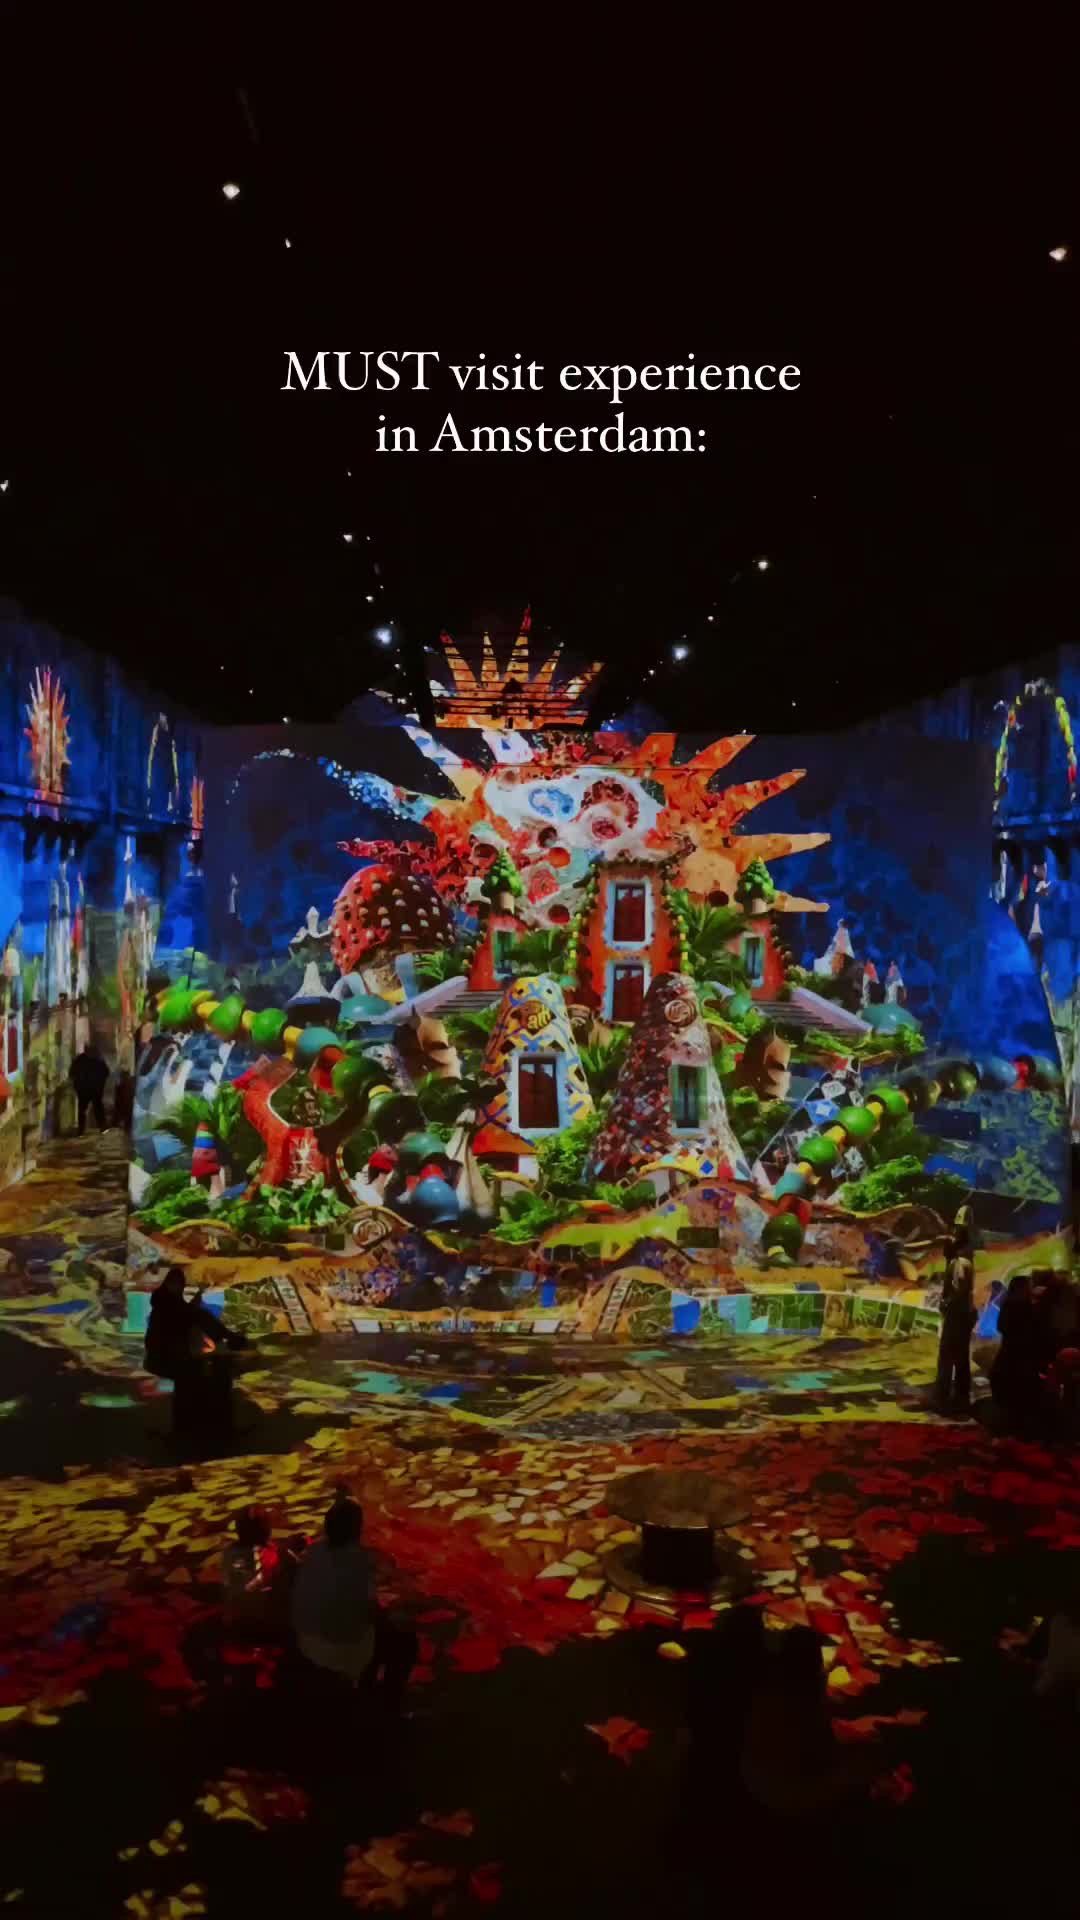 Art Exhibitions in Amsterdam: Dalí & Gaudí at Fabrique